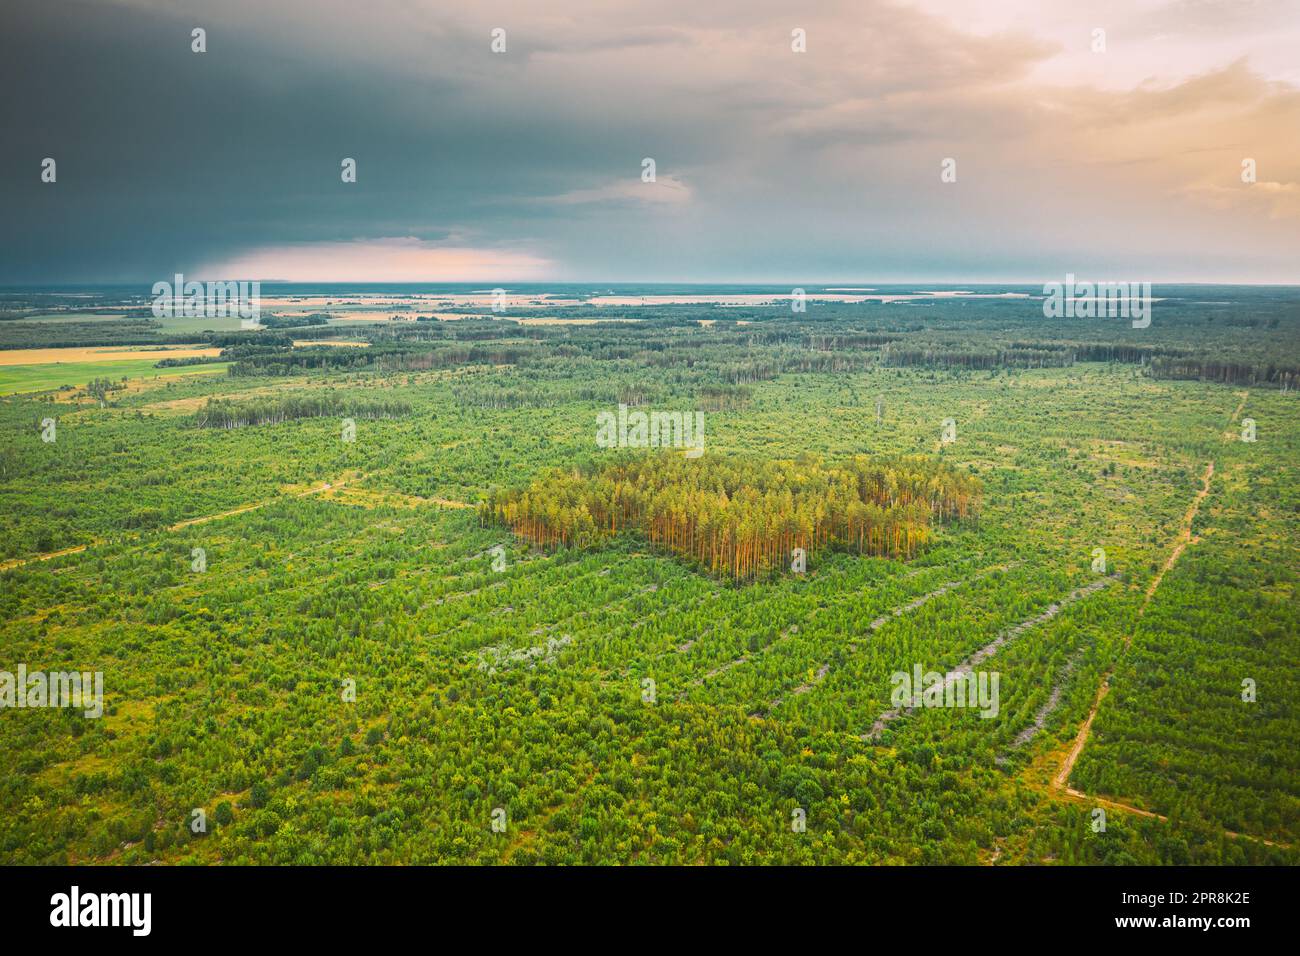 Aerial View Green Forest Deforestation Area Landscape. Top View Of New Young Growing Forest. European Nature From High Attitude In Summer Season Stock Photo